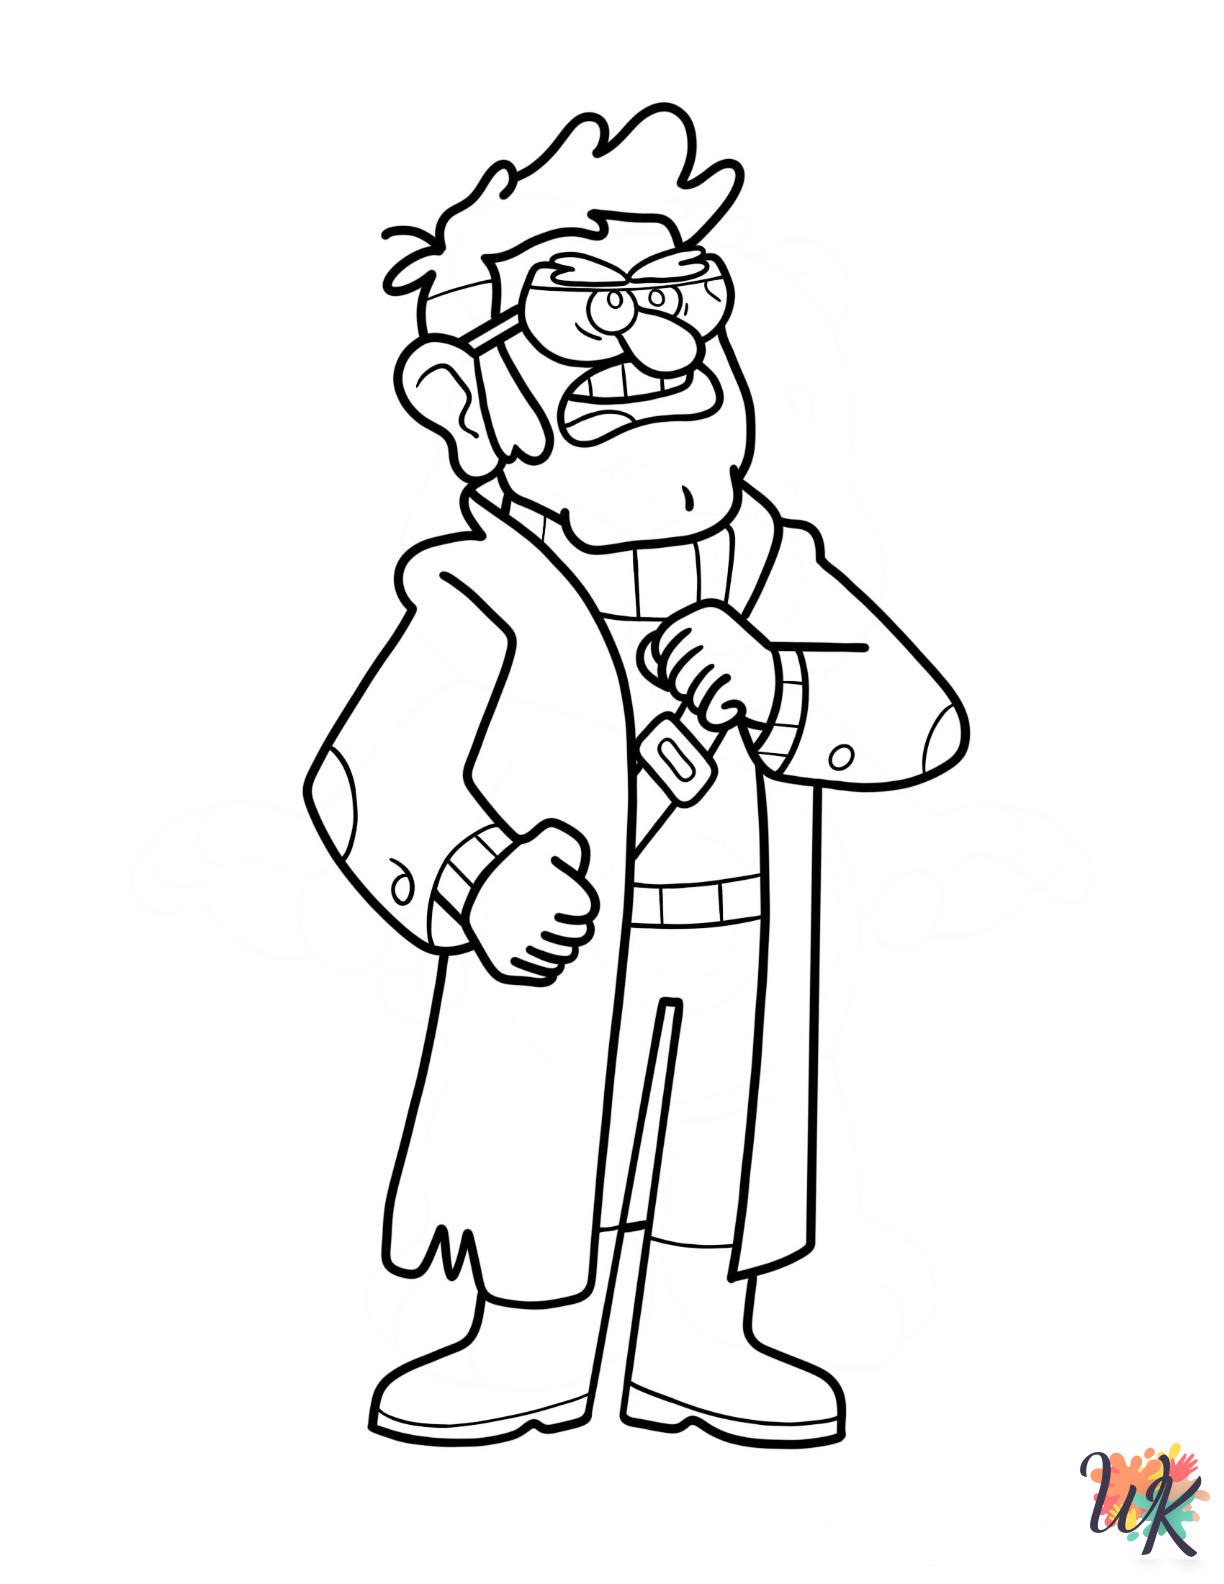 Gravity Falls coloring pages for adults